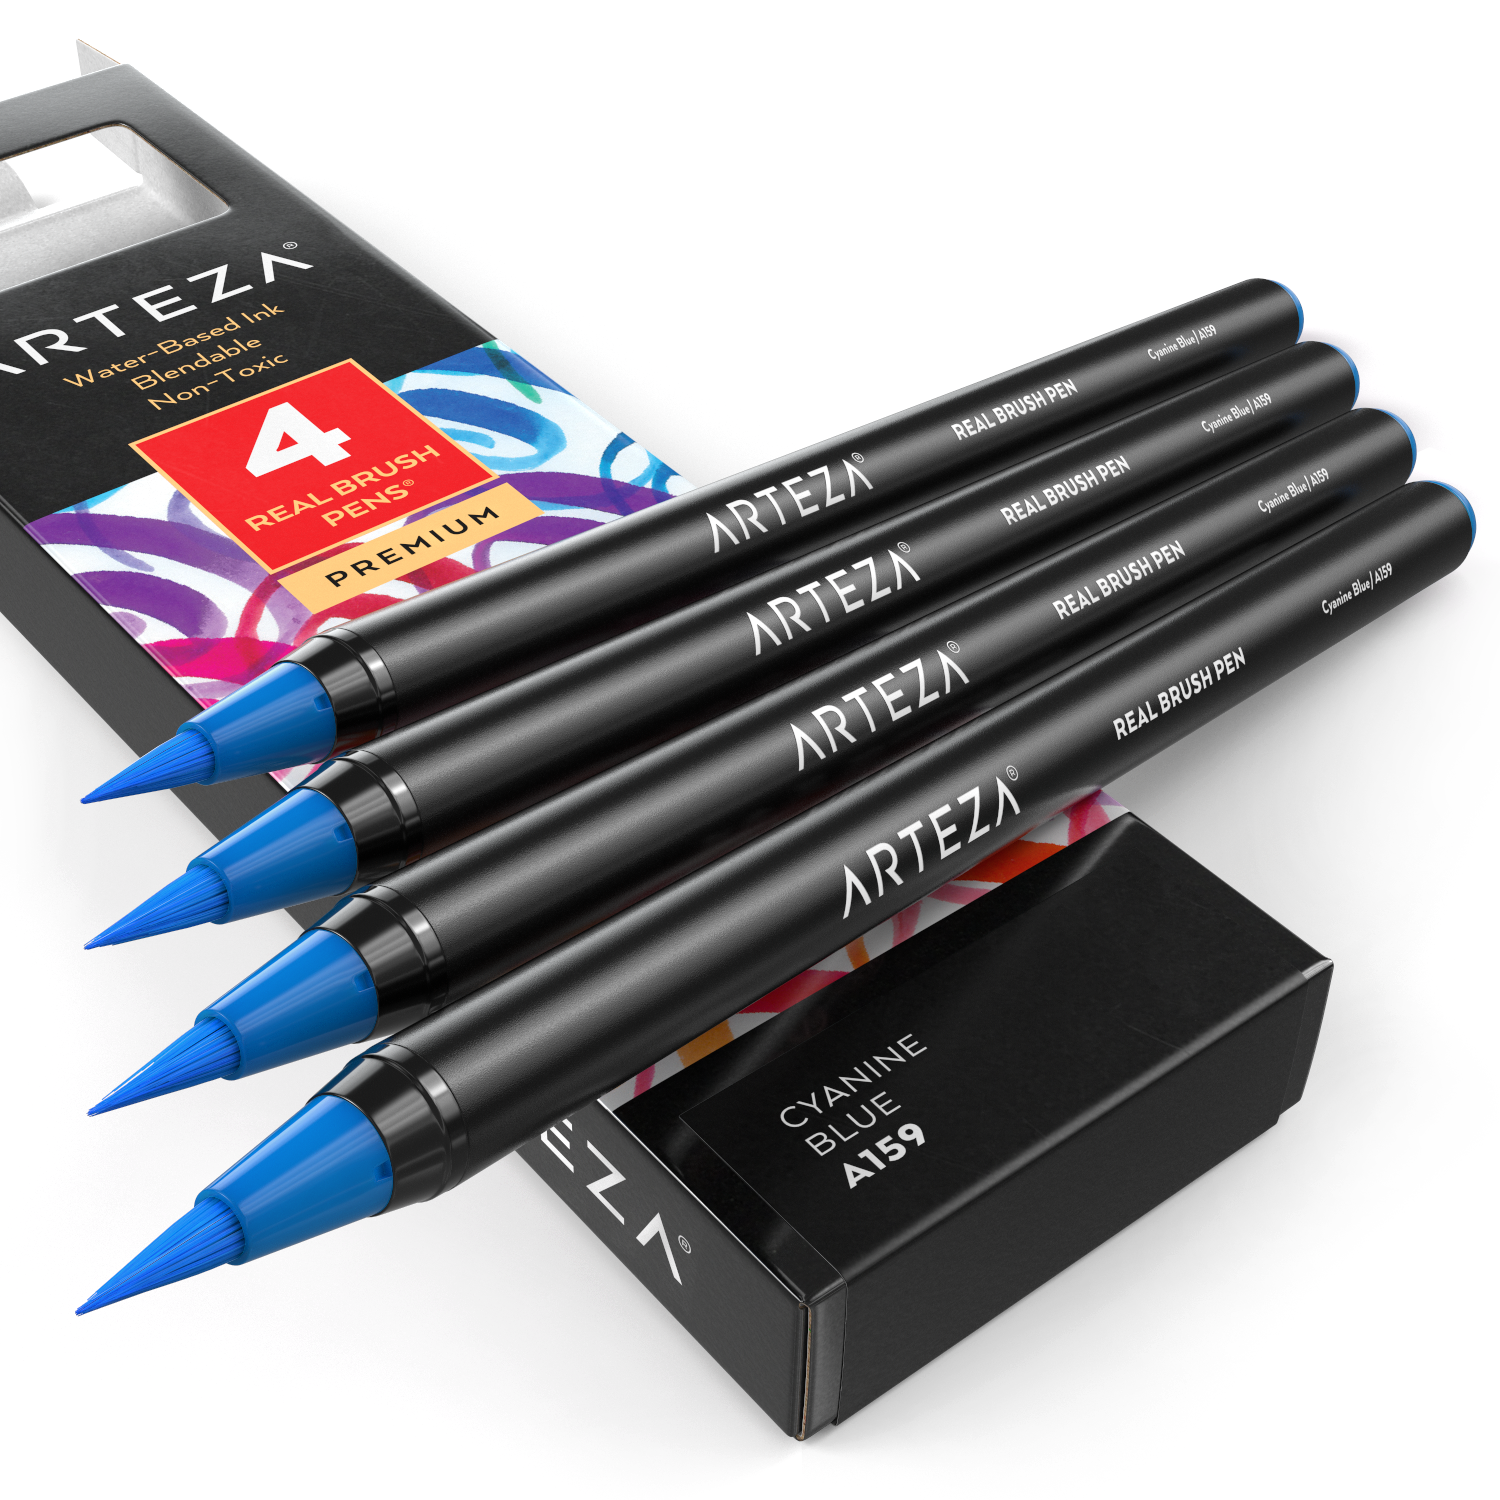 Arteza Dual Tip Brush Pens, 12 Pastel Colors, Watercolor Calligraphy Markers, Nylon Brush and Fine Tip, Water-Based Ink, for Illustration, Lettering